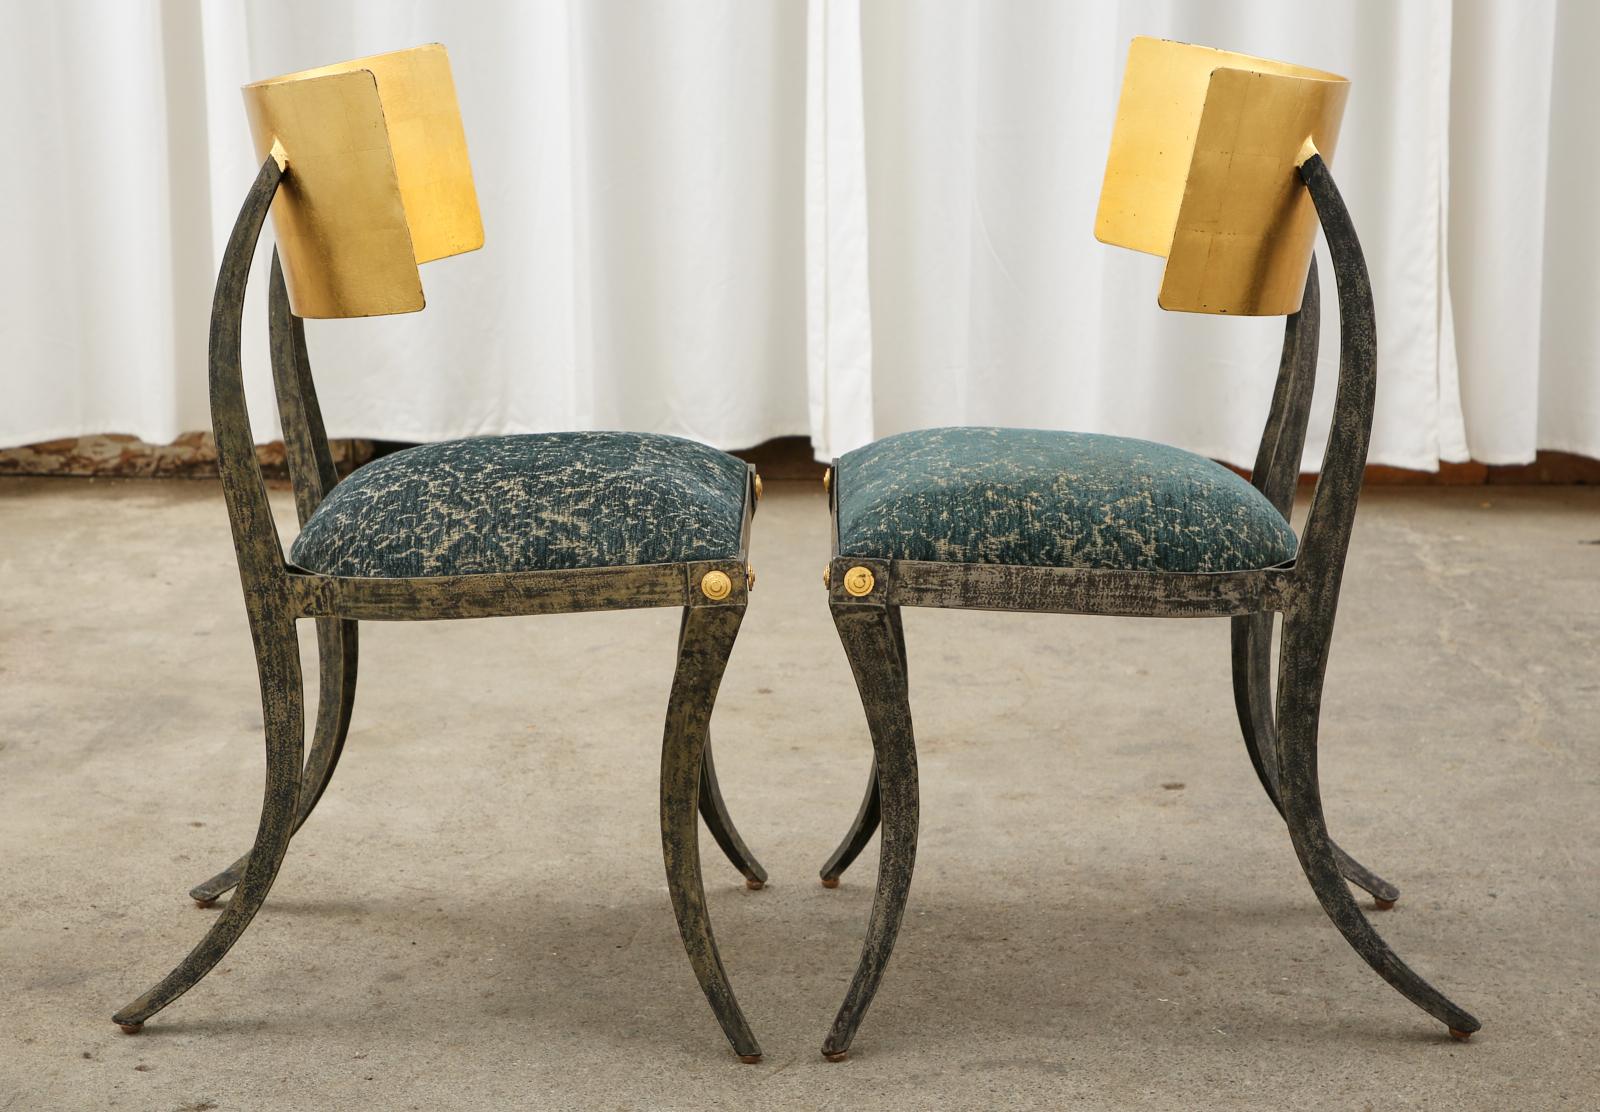 Philippine Pair of Gilt Iron Klismos Chairs by Ched Berenguer-Topacio